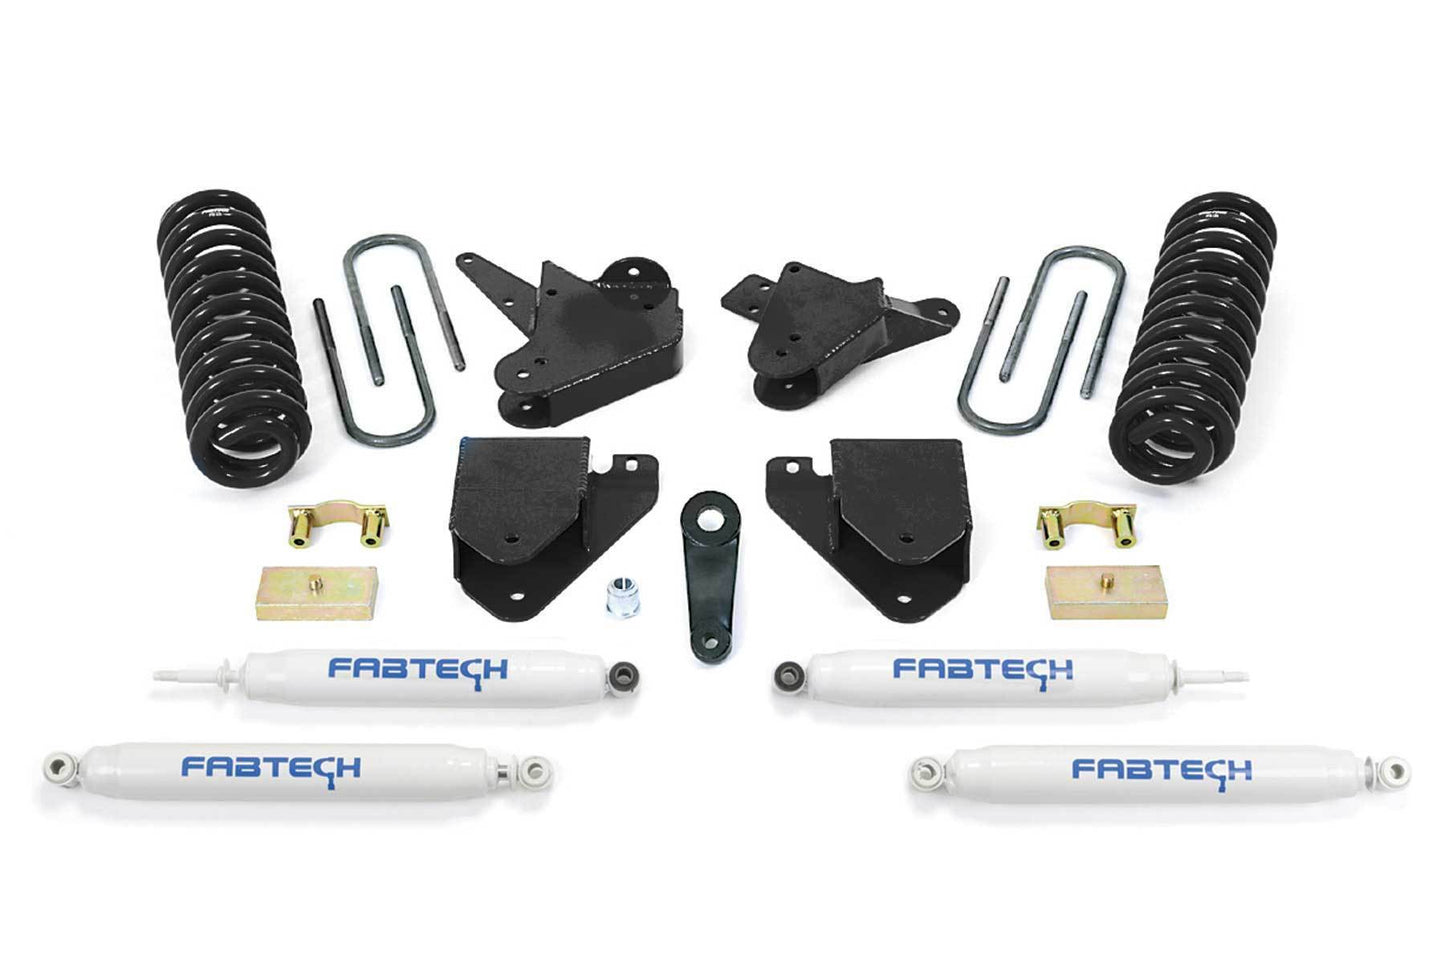 6" BASIC SYS W/PERF SHKS 08-10 FORD F250 2WD V10 & DIESEL - 6" BASIC SYS W/PERF - Fabtech - Texas Complete Truck Center